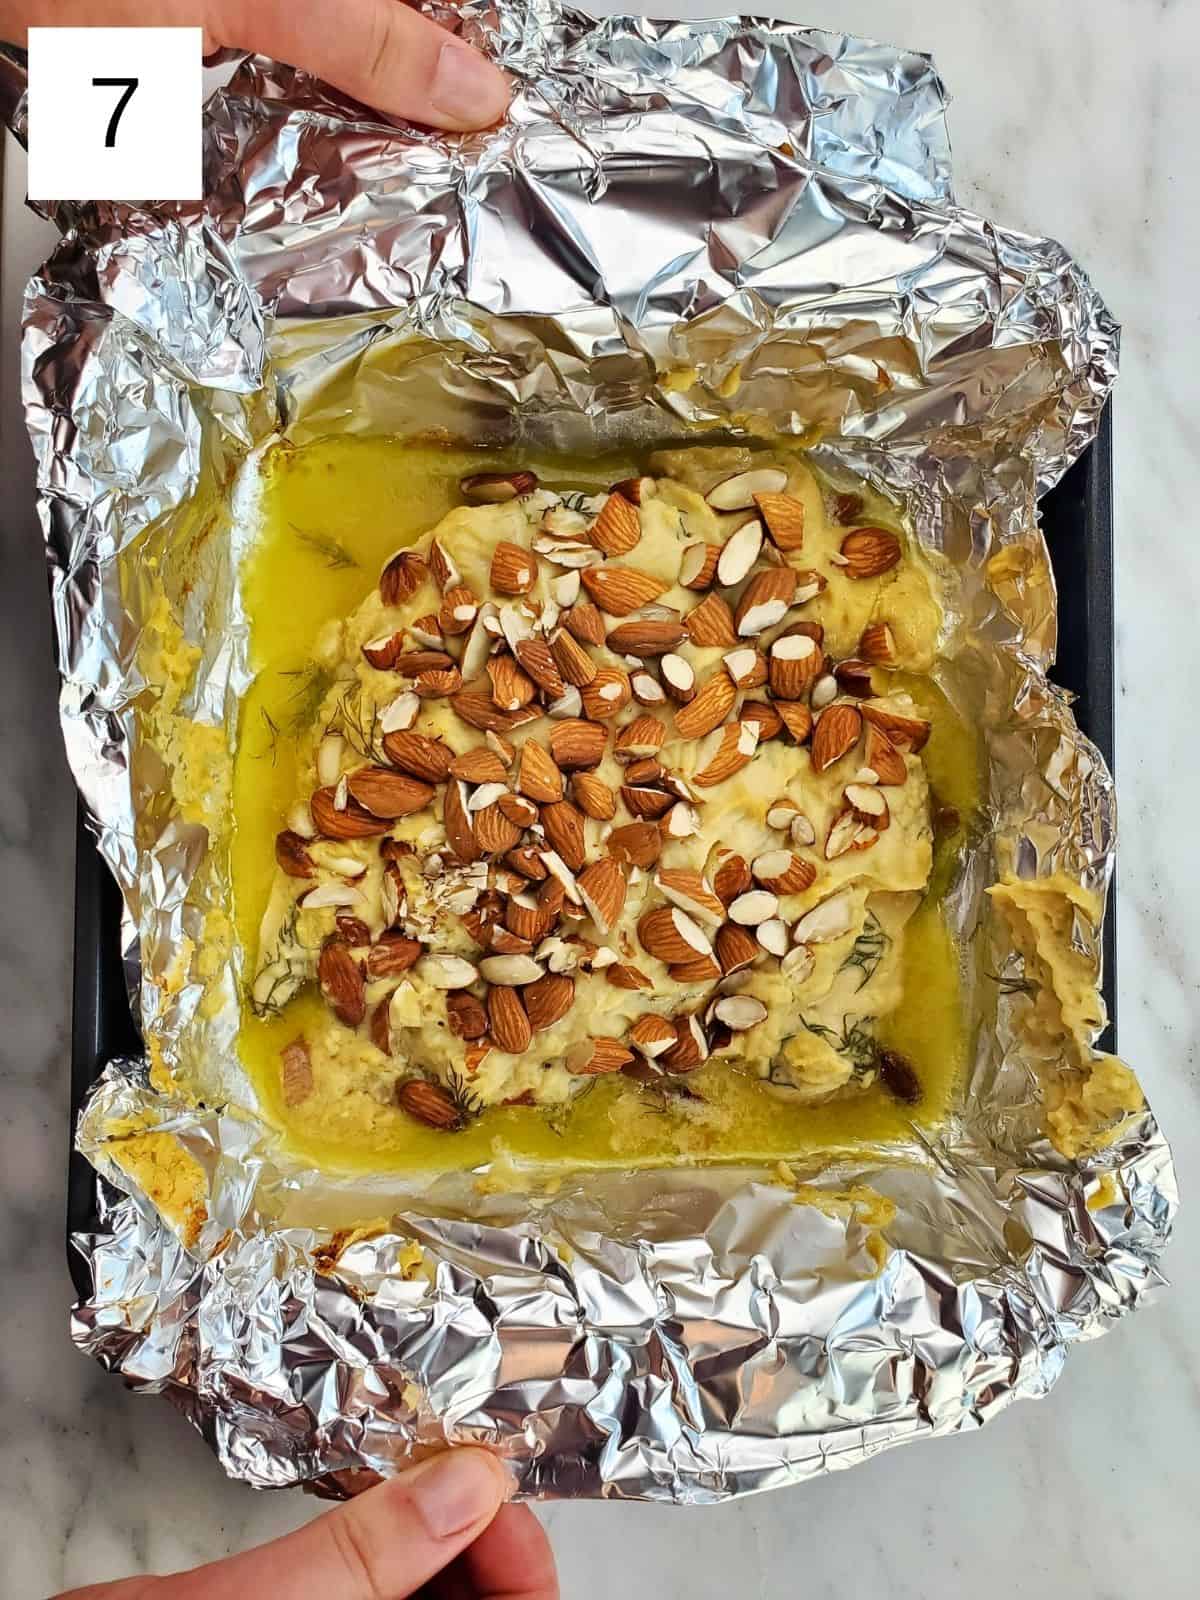 baked hummus-covered chicken on a foil-lined baking tray.